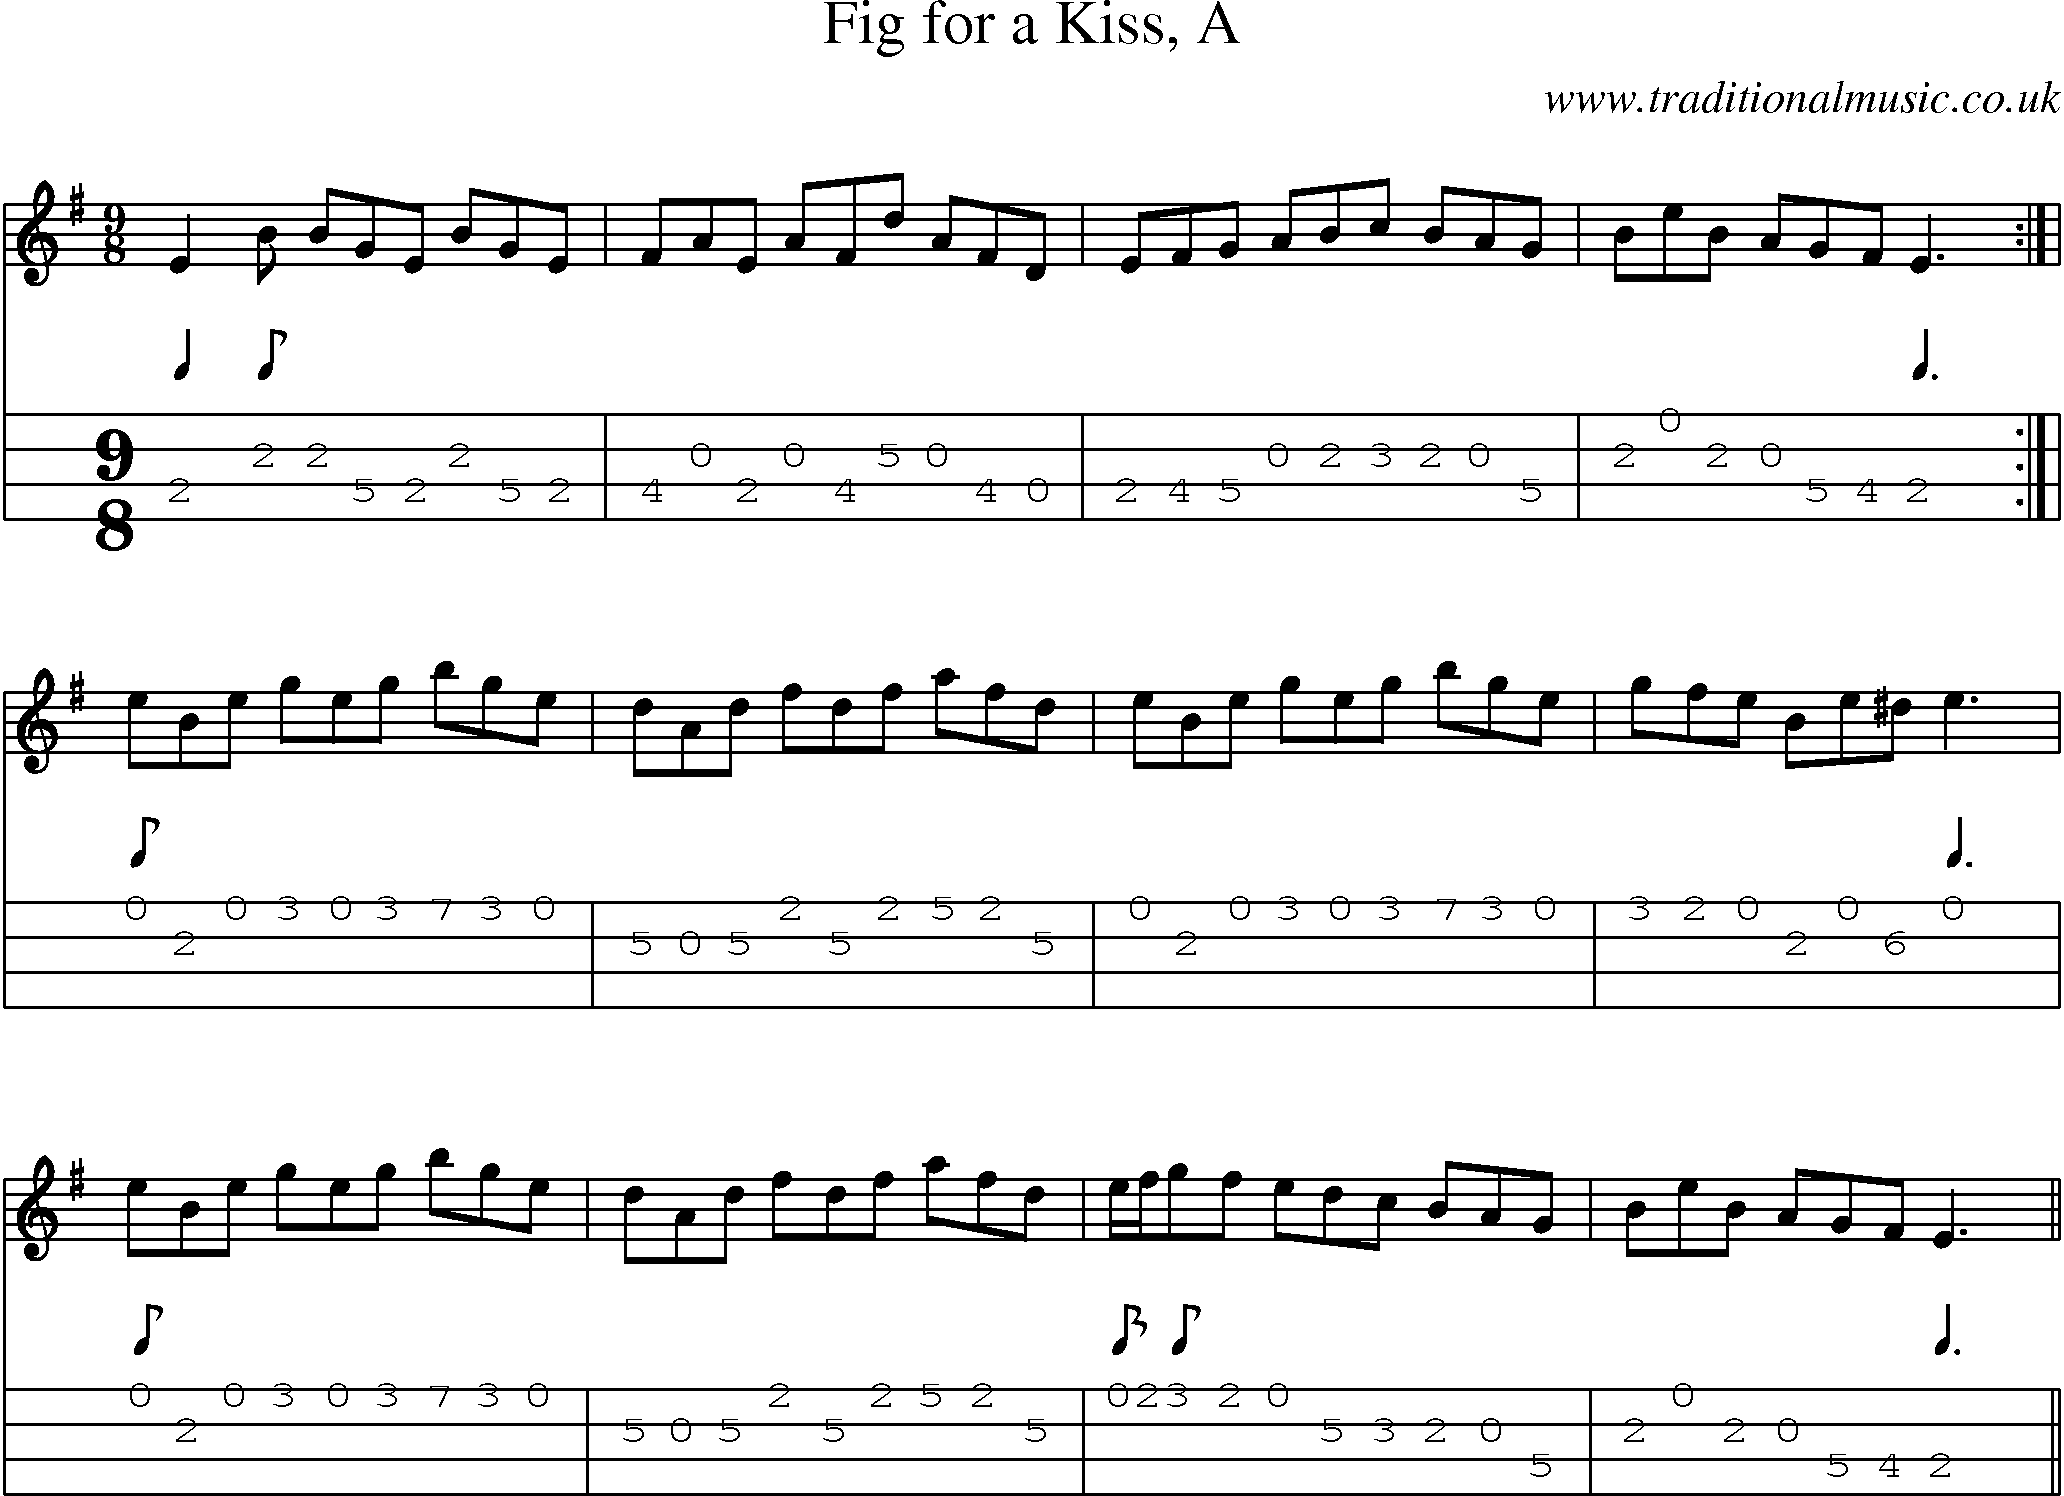 Music Score and Mandolin Tabs for Fig For A Kiss A